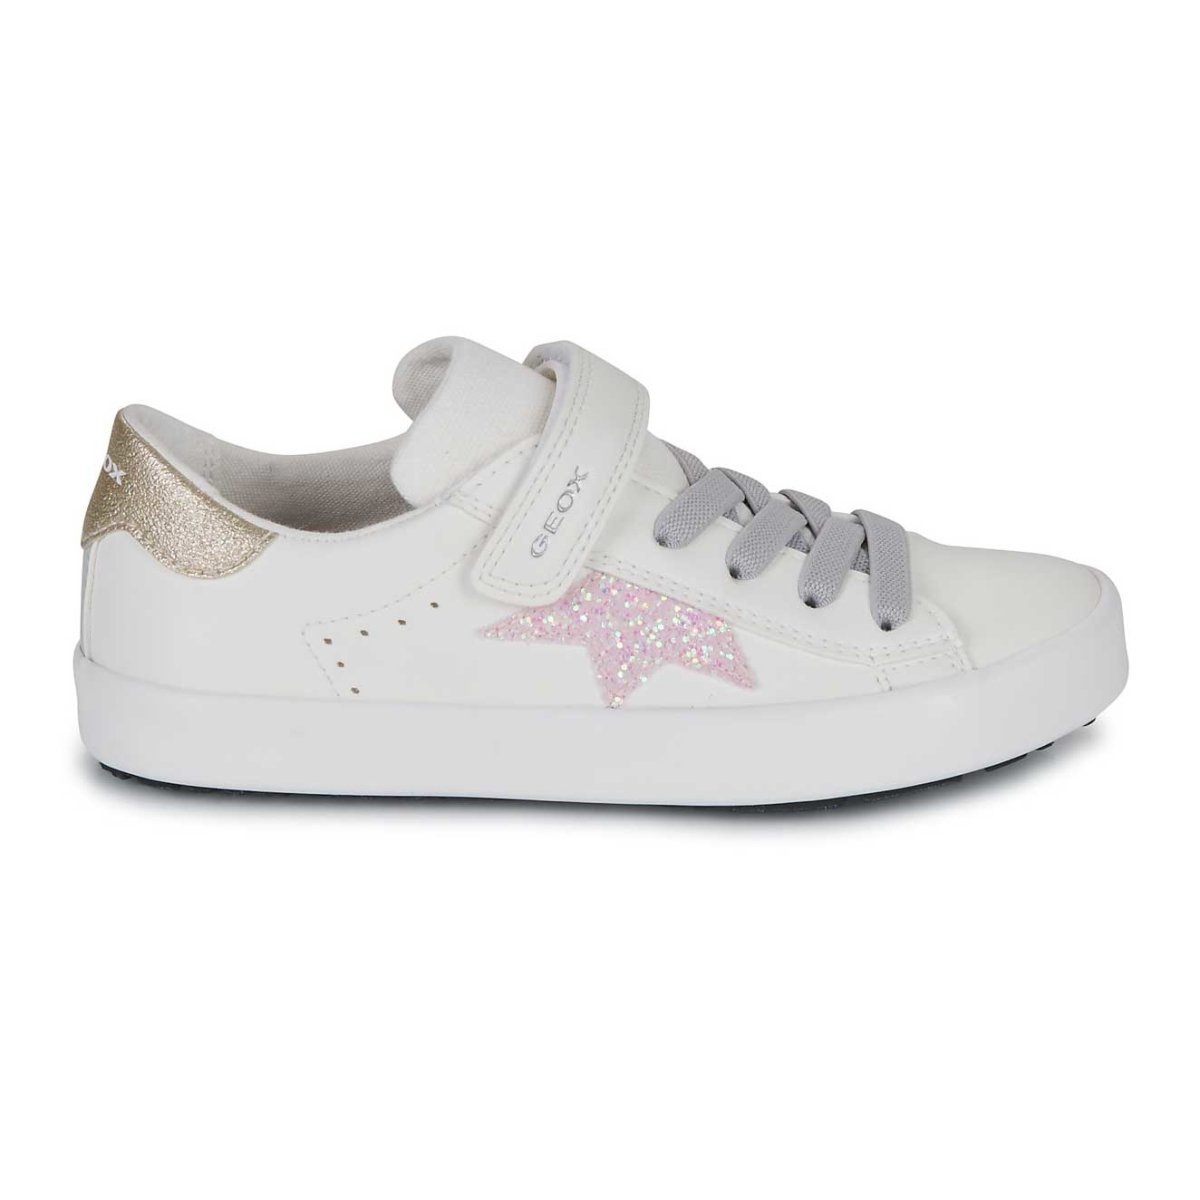 Girl's Kilwi White/Pink Star Tip Top Shoes of New York